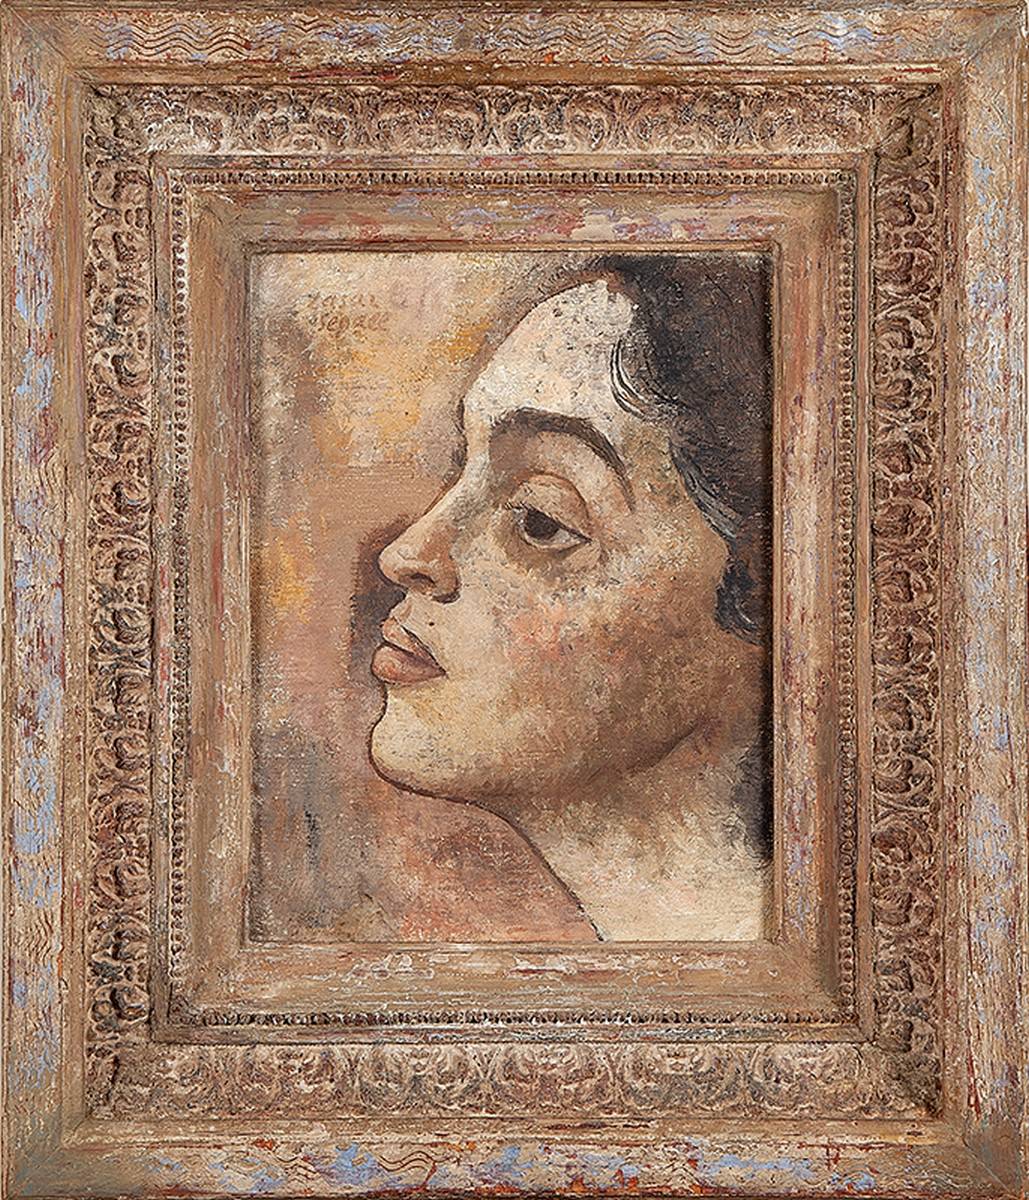 LASAR SEGALL, Portrait of Lucy. Ost, 33 x 40. Signed in the cse and dated 1936.